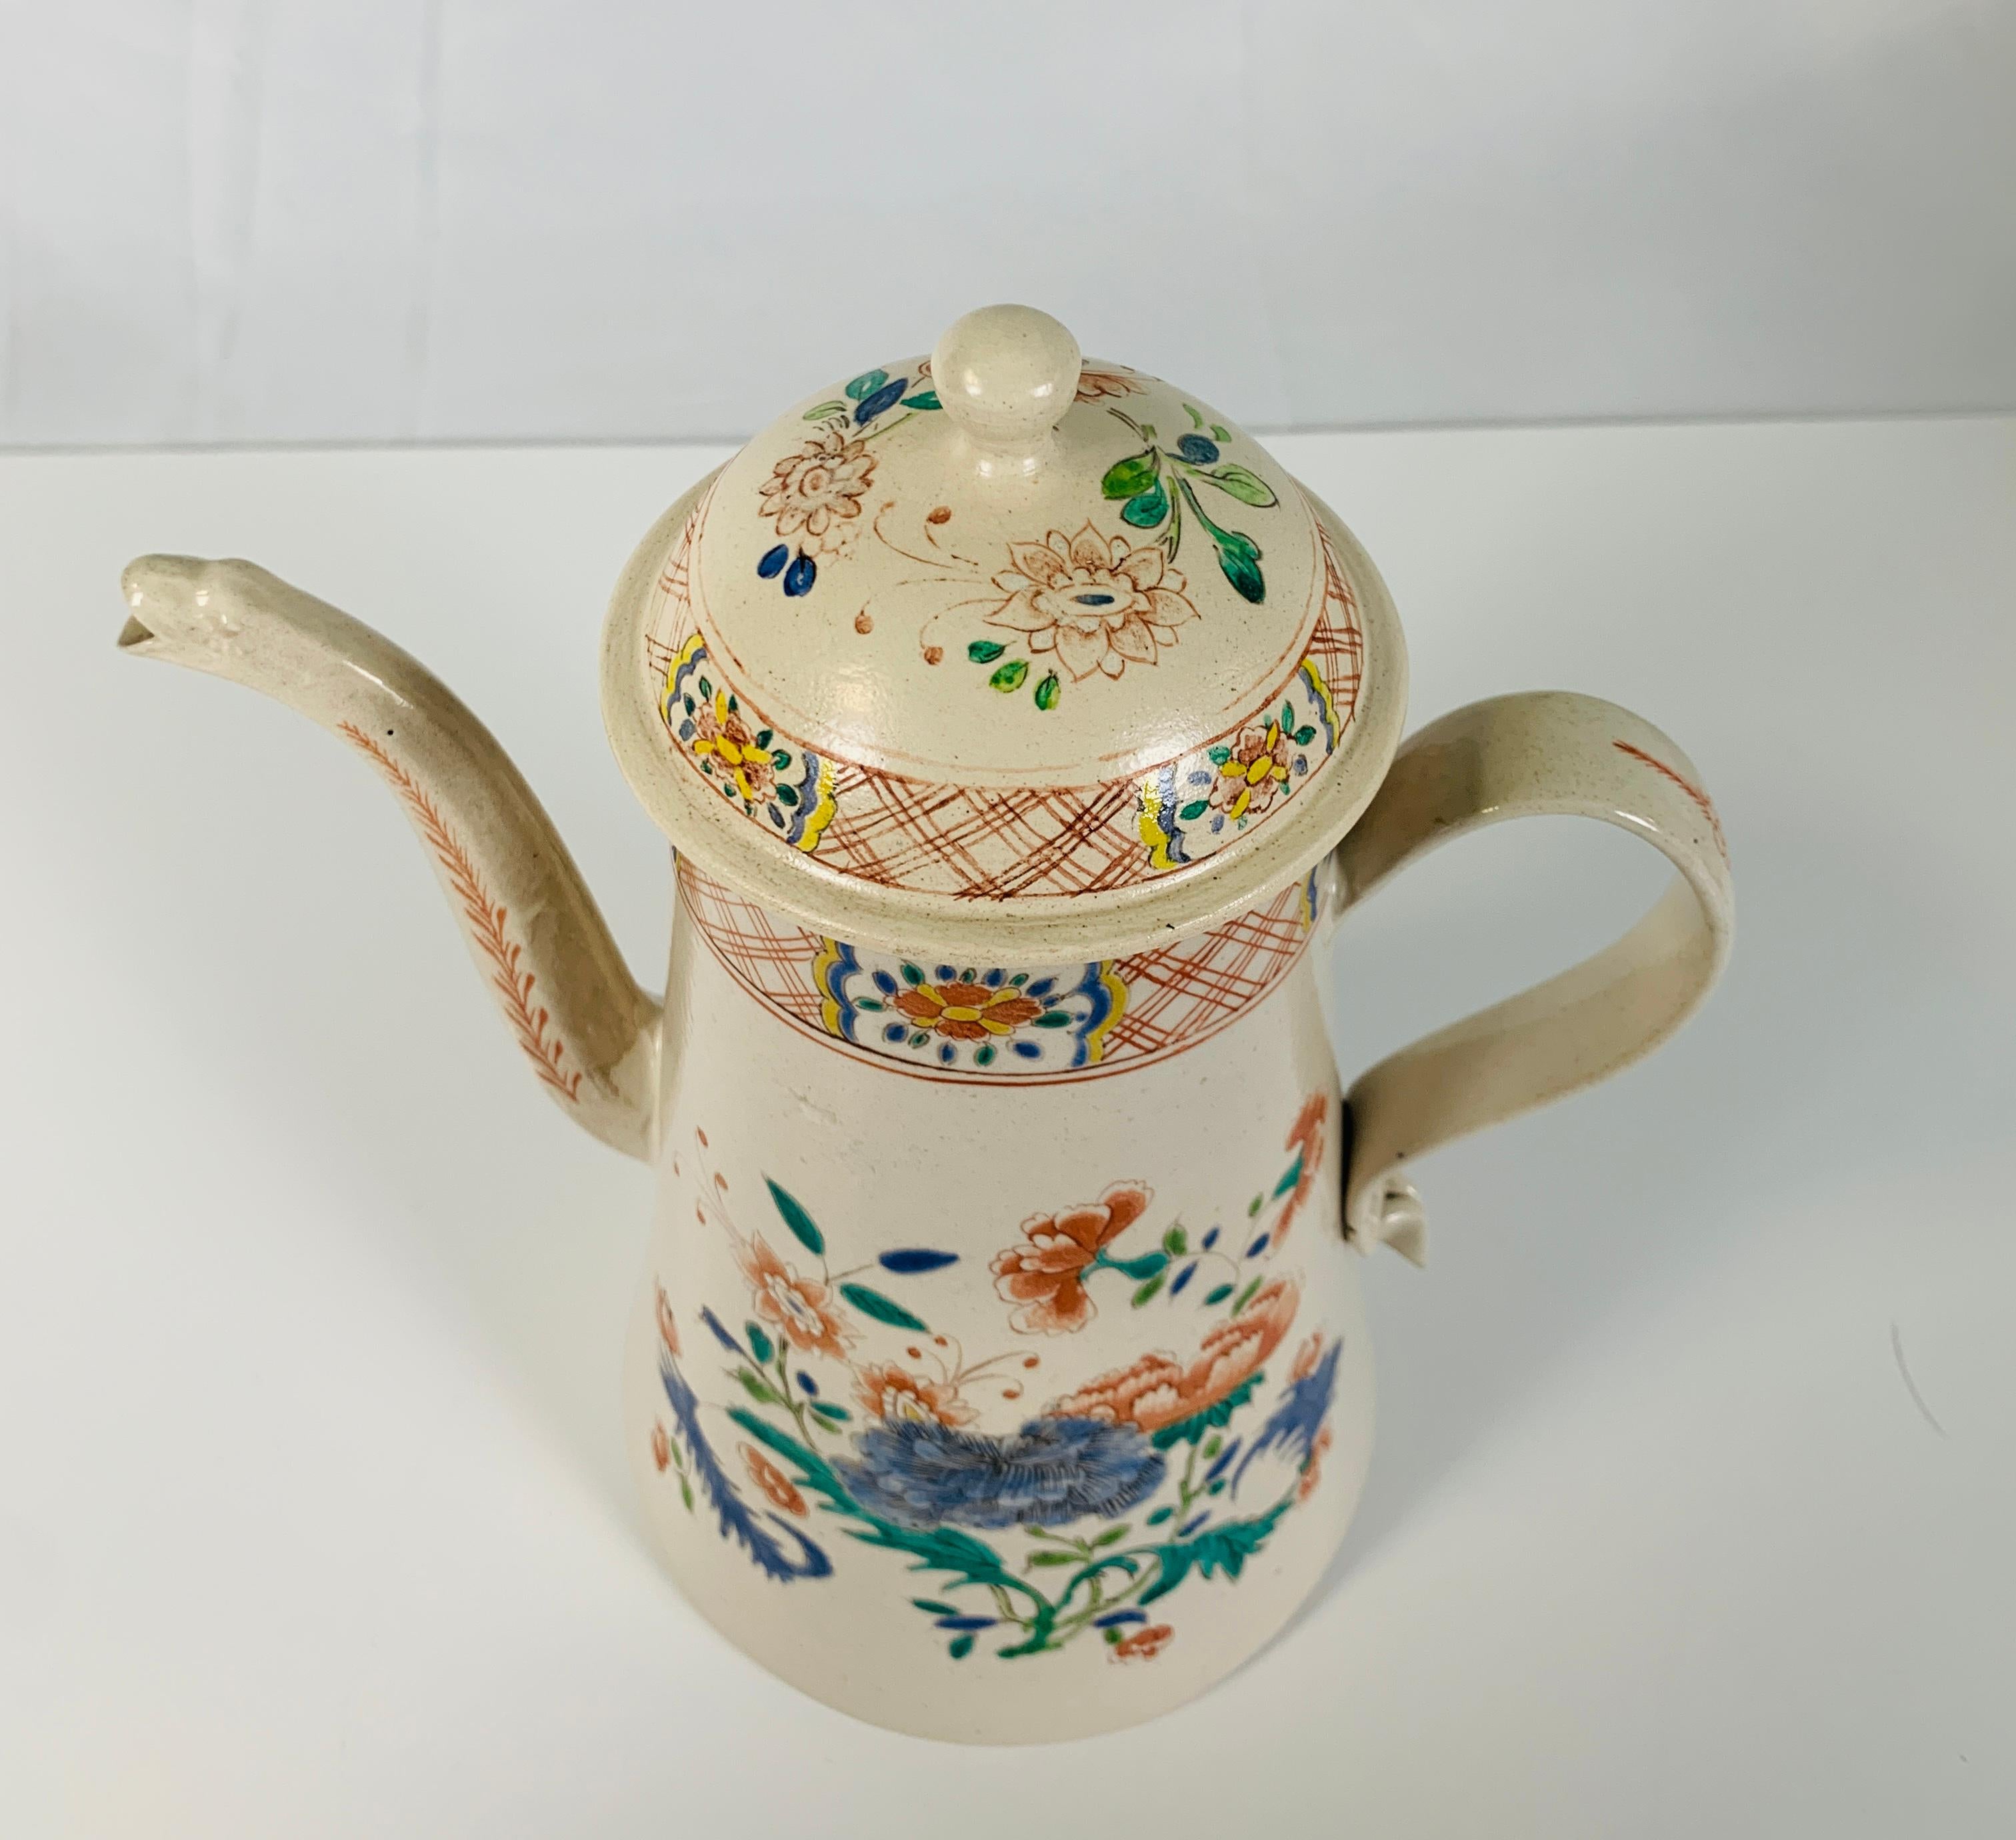 Antique Salt-Glazed Teapot Made in Mid-18th Century, England 1